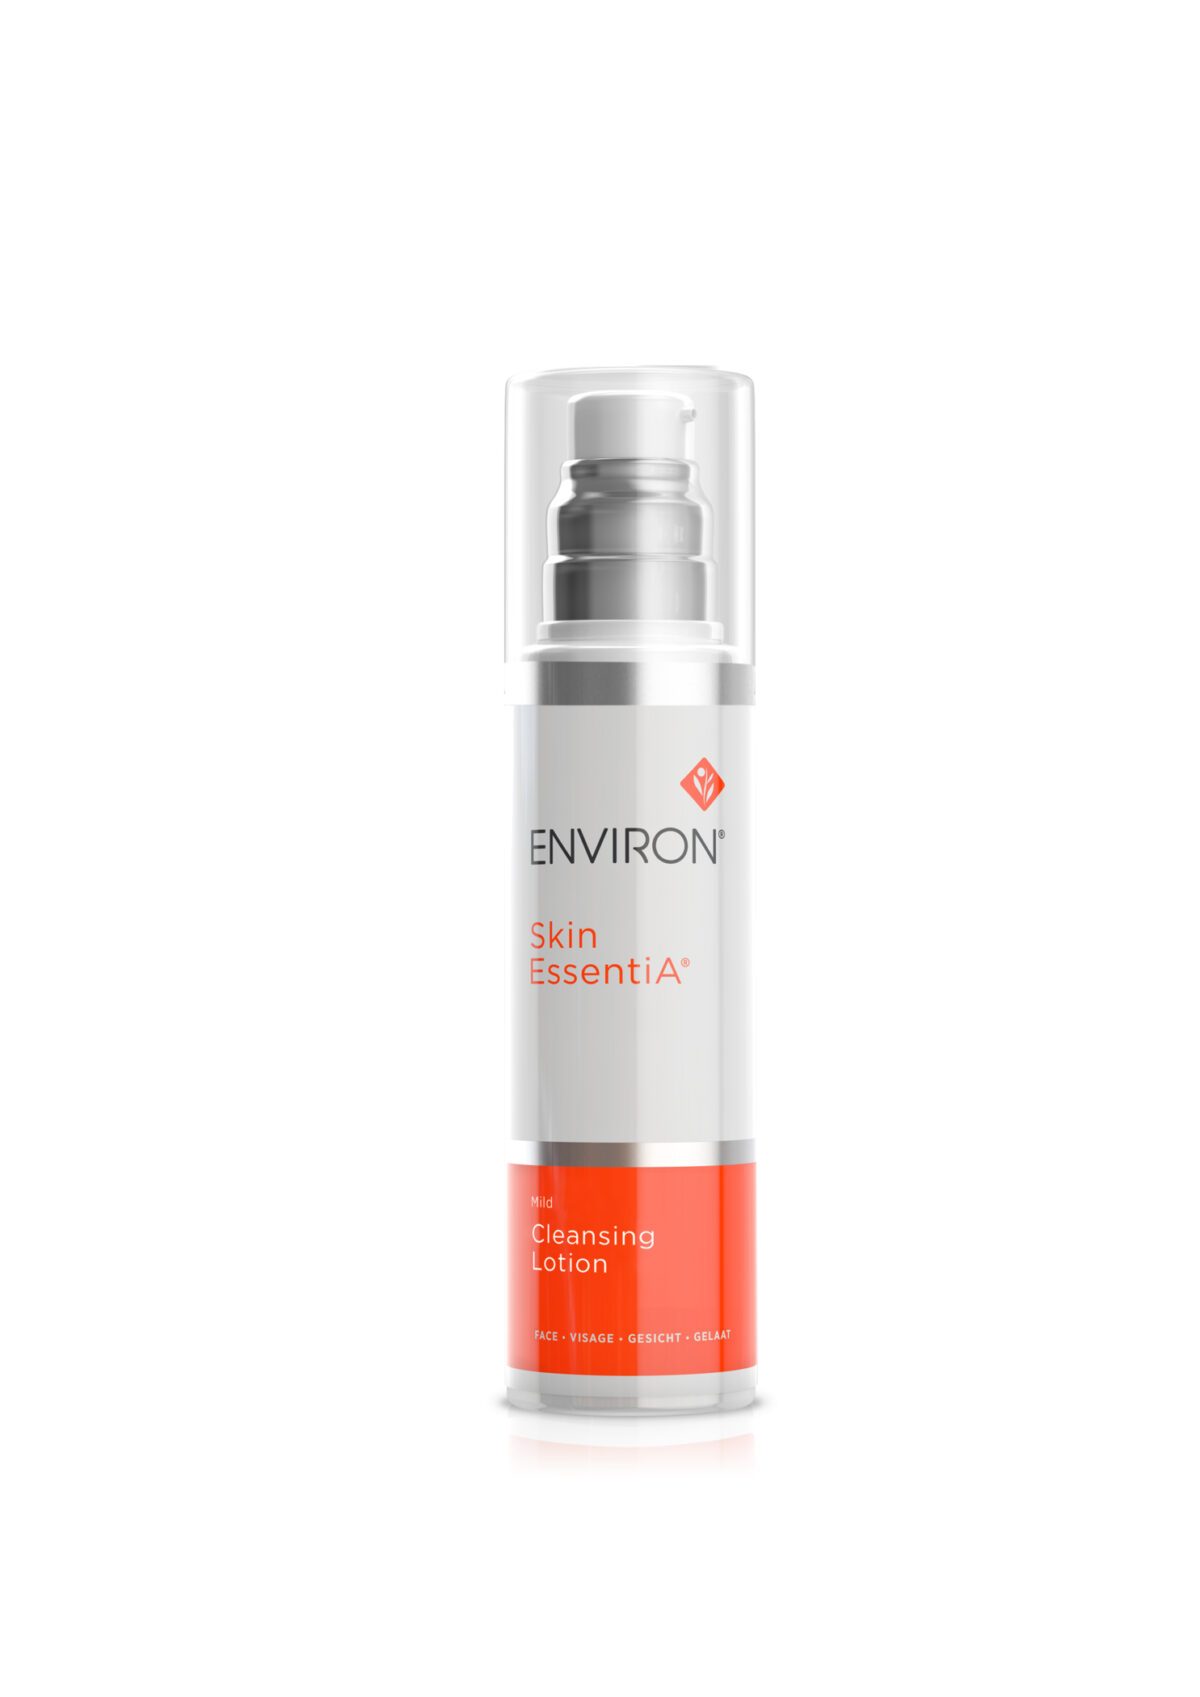 Environ Skin Care Cleansing Lotion